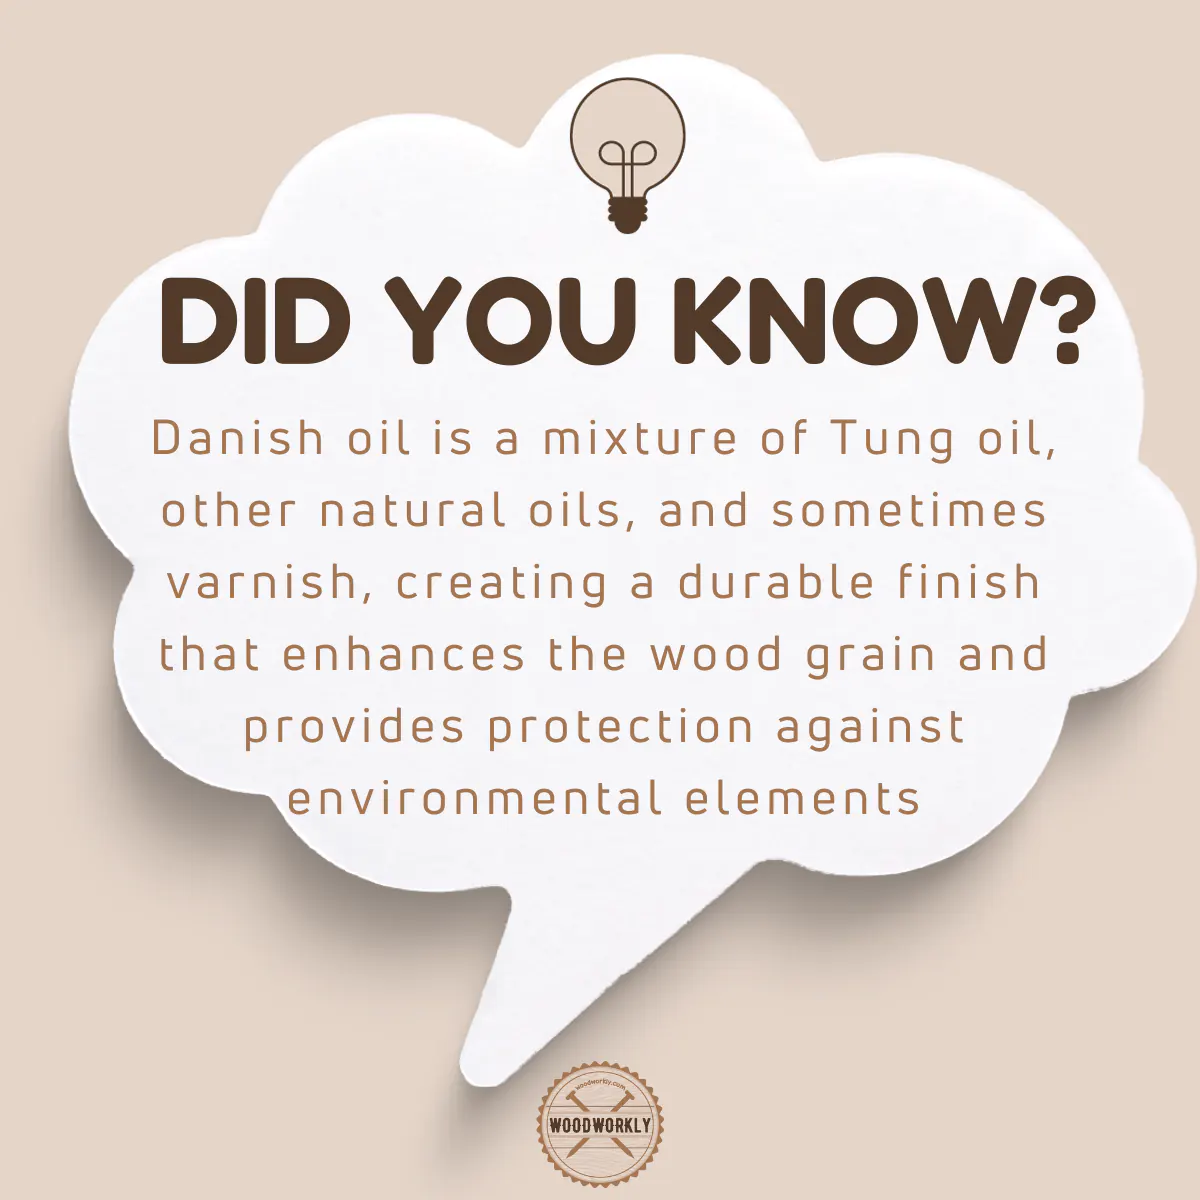 Did you know fact about Danish oil